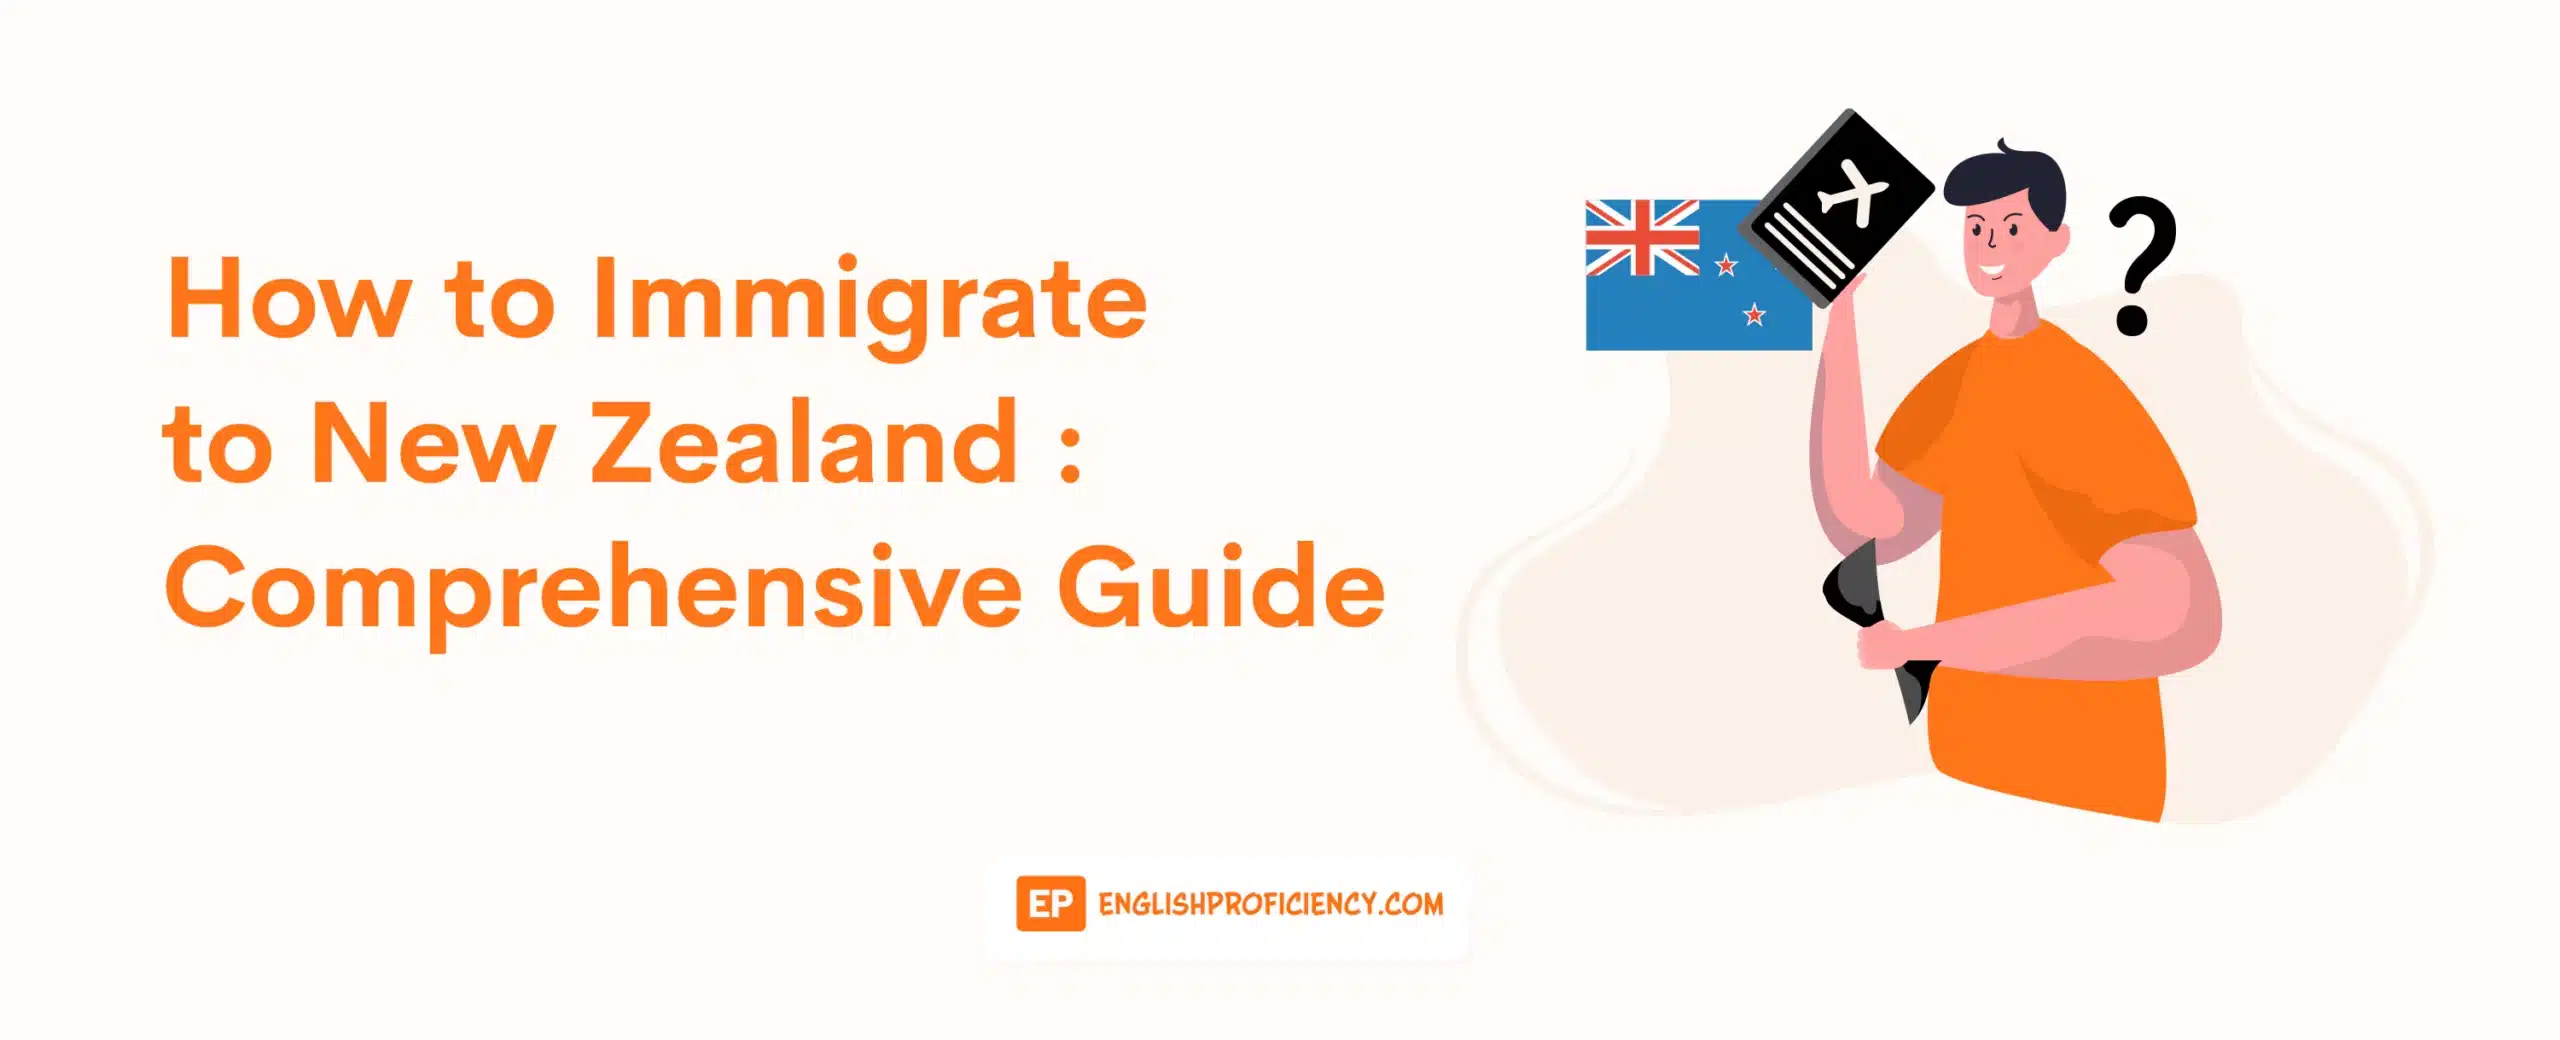 How to Immigrate to New Zealand Comprehensive Guide